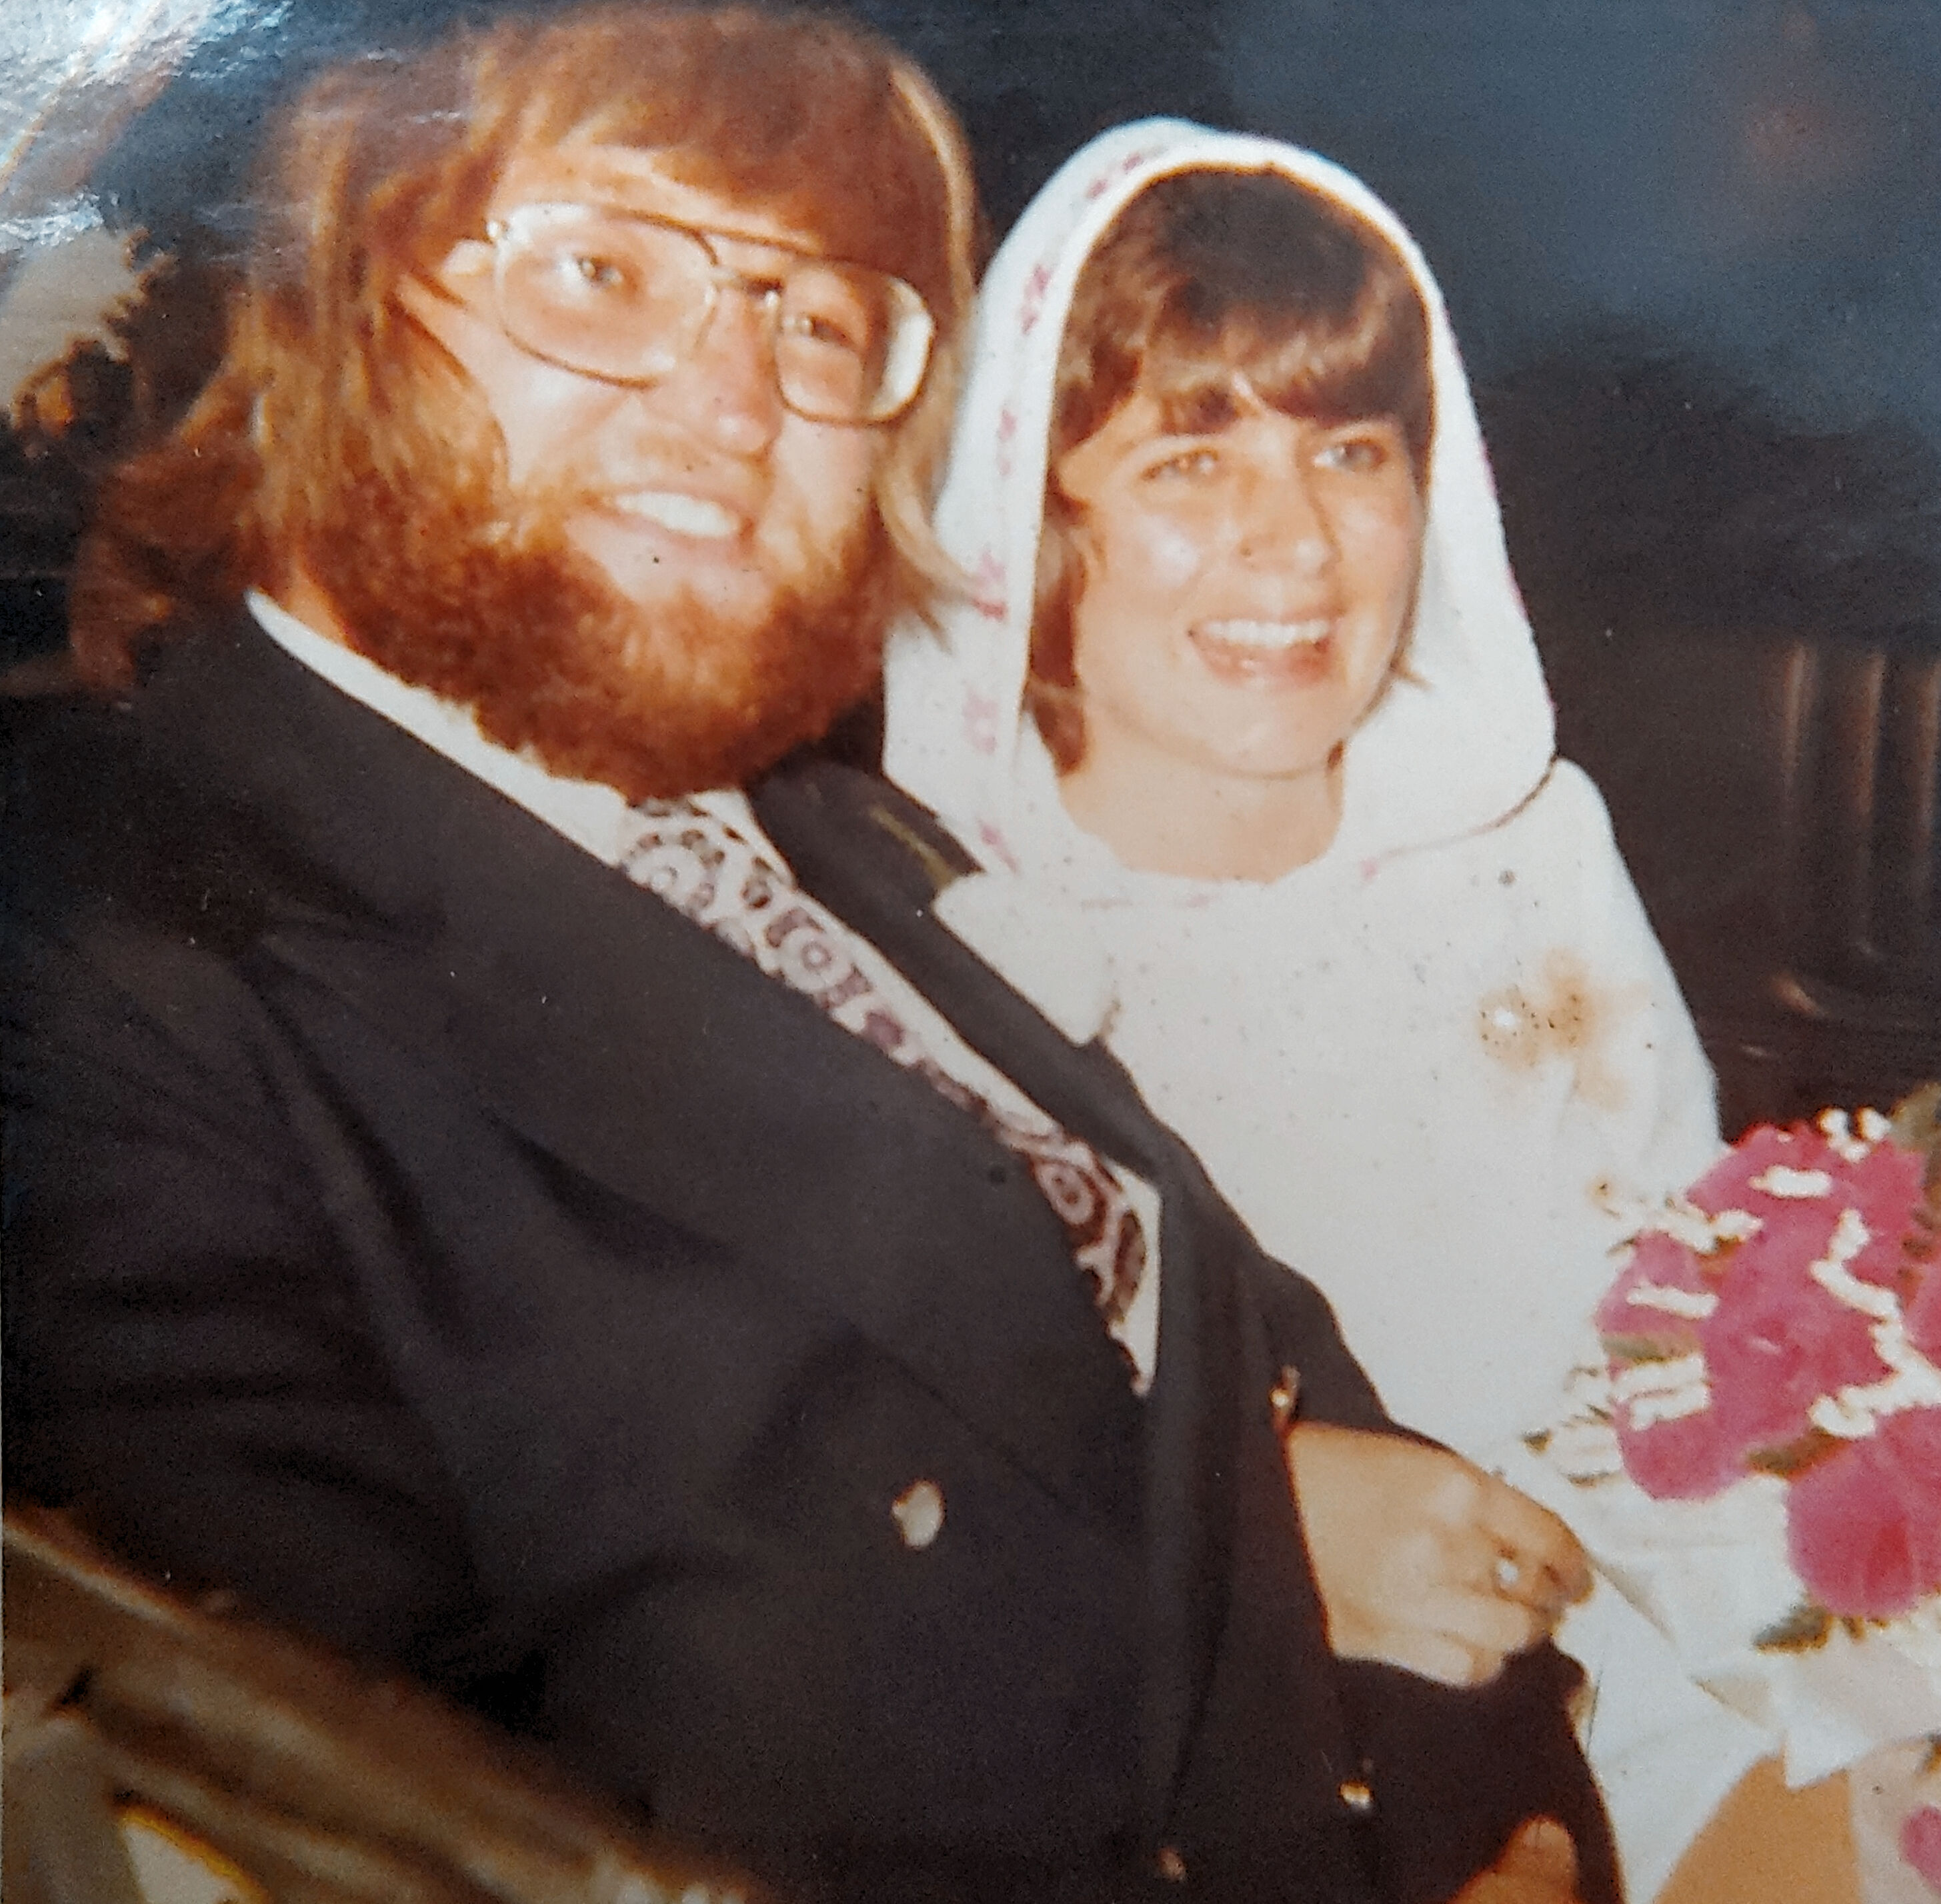 Jim and Angela Moore August 25th, 1972
50th Wedding Anniversary August 25, 2022